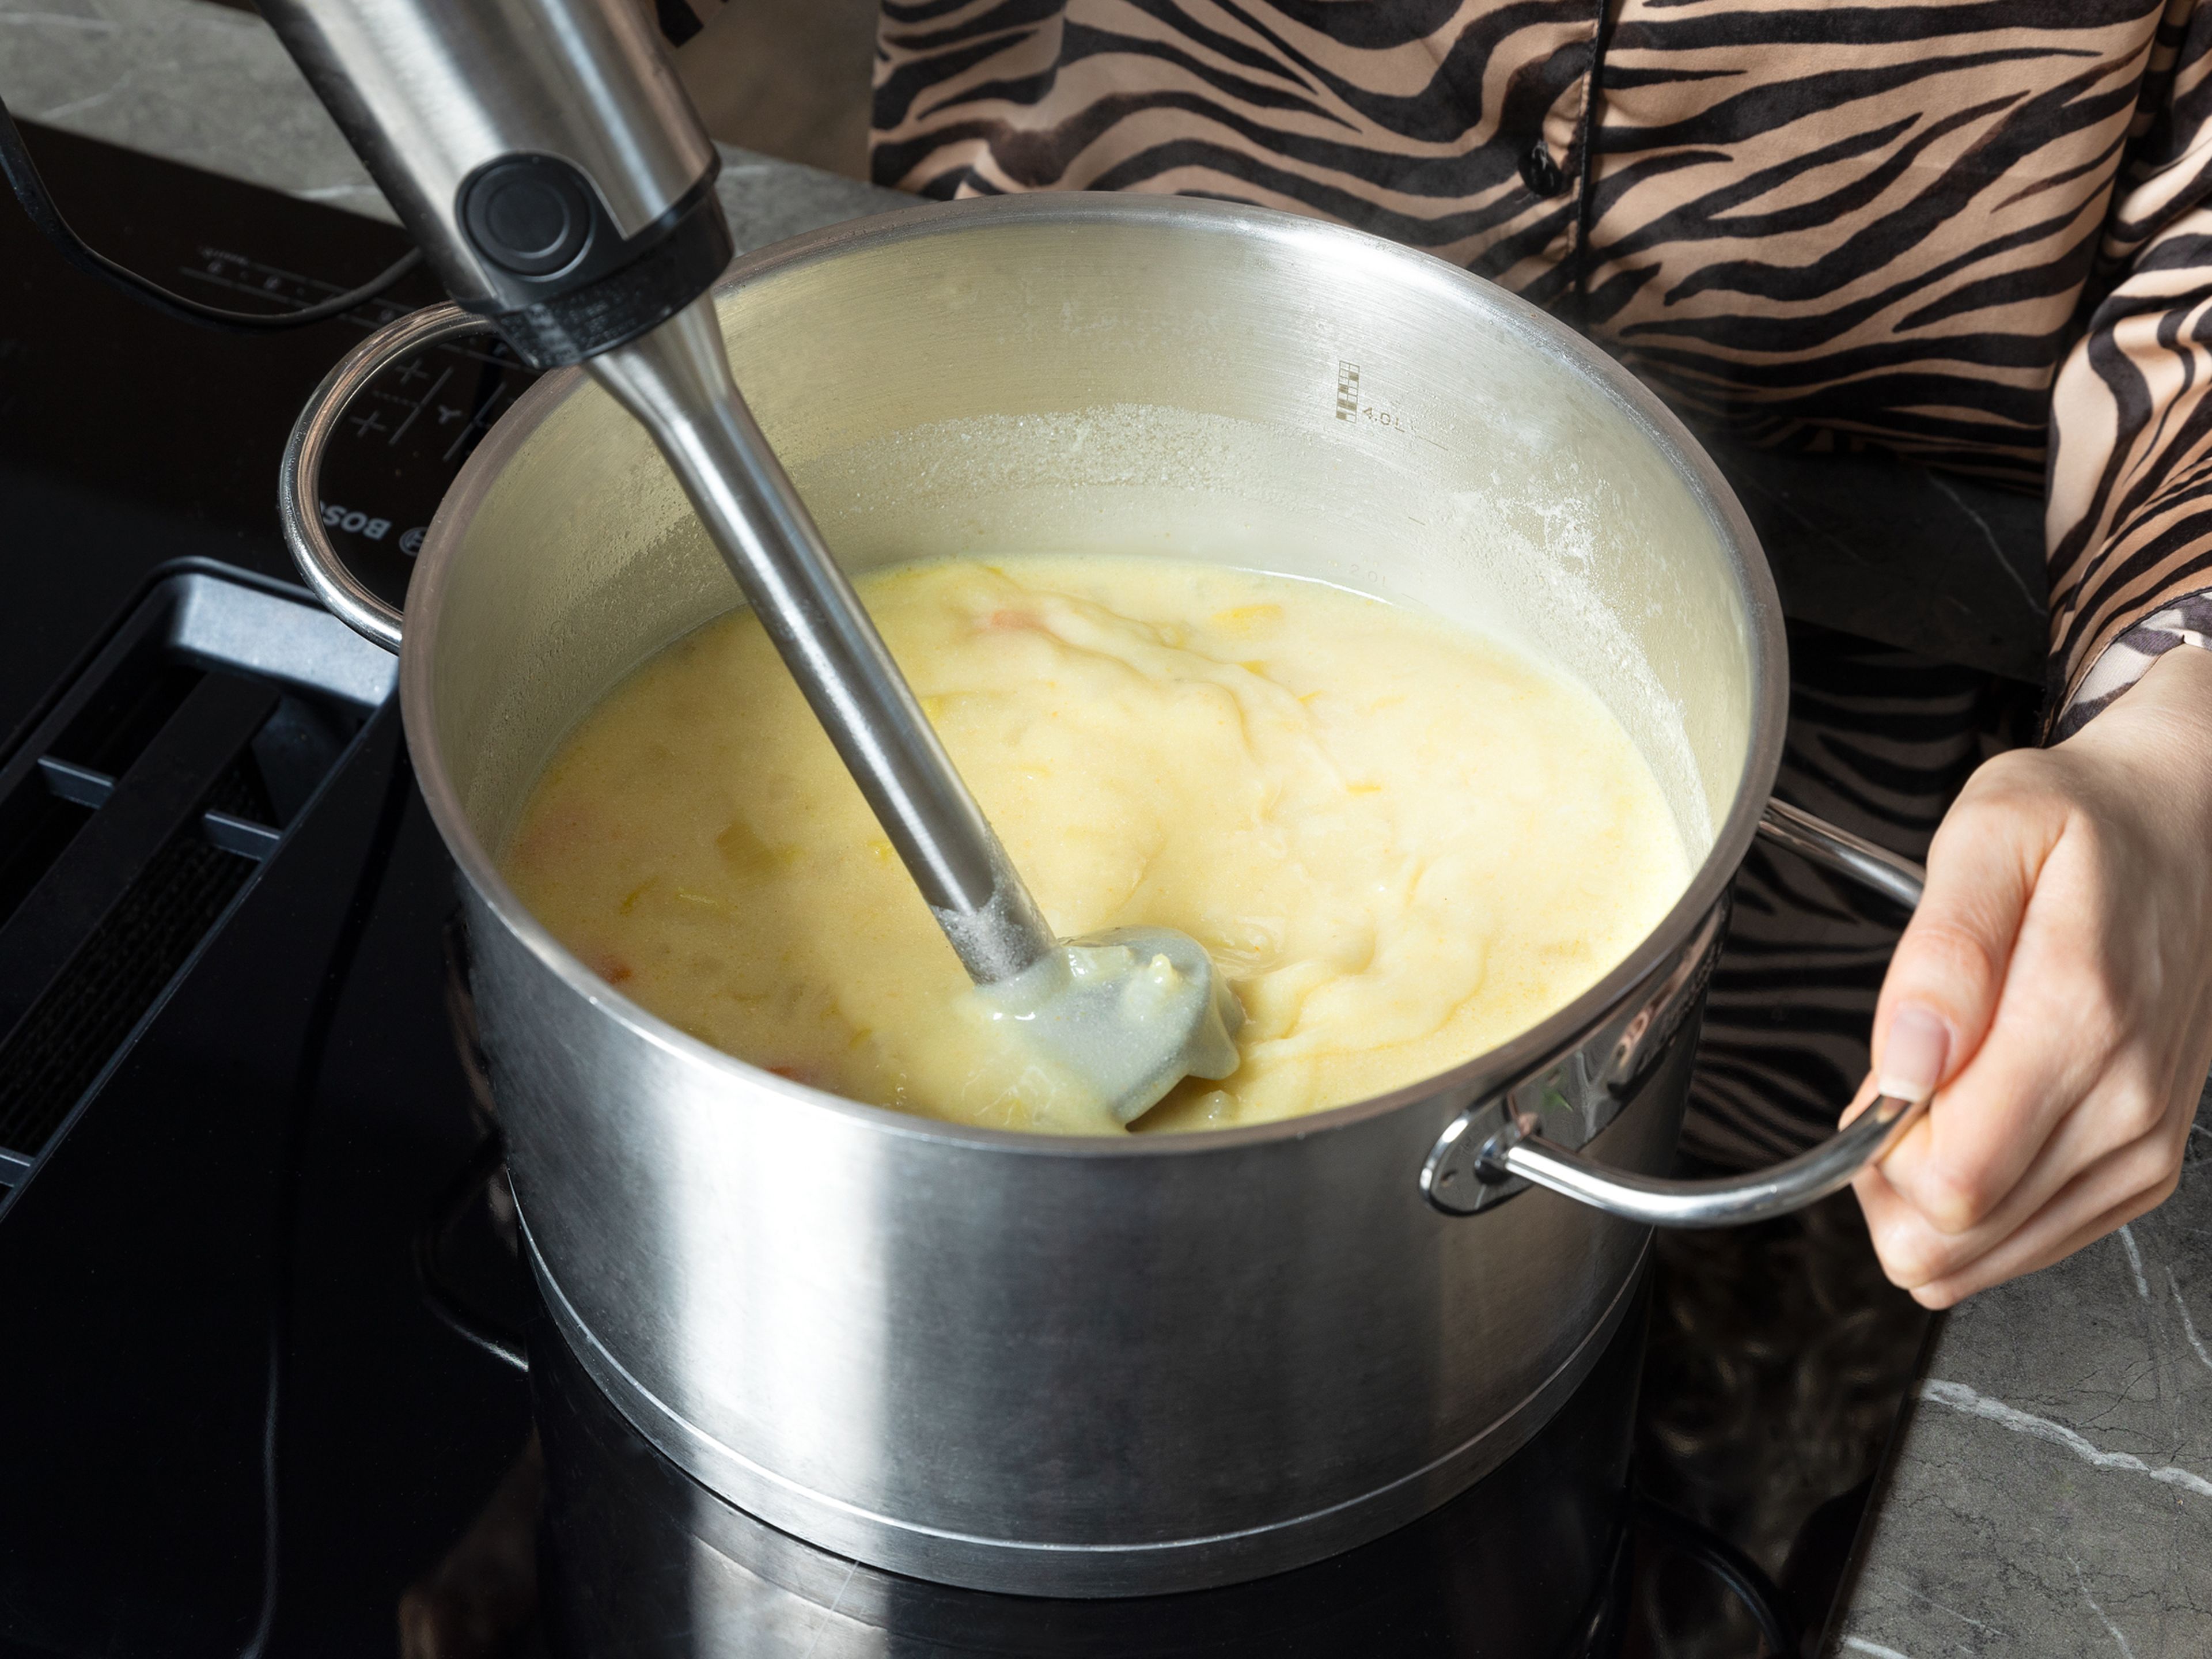 Stir most of the crème fraîche into the soup, reserving a dollop for serving. Using an immersion blender, briefly puree the soup in the pot, to make it creamy but remains a chunky consistency. Return the heat to medium.